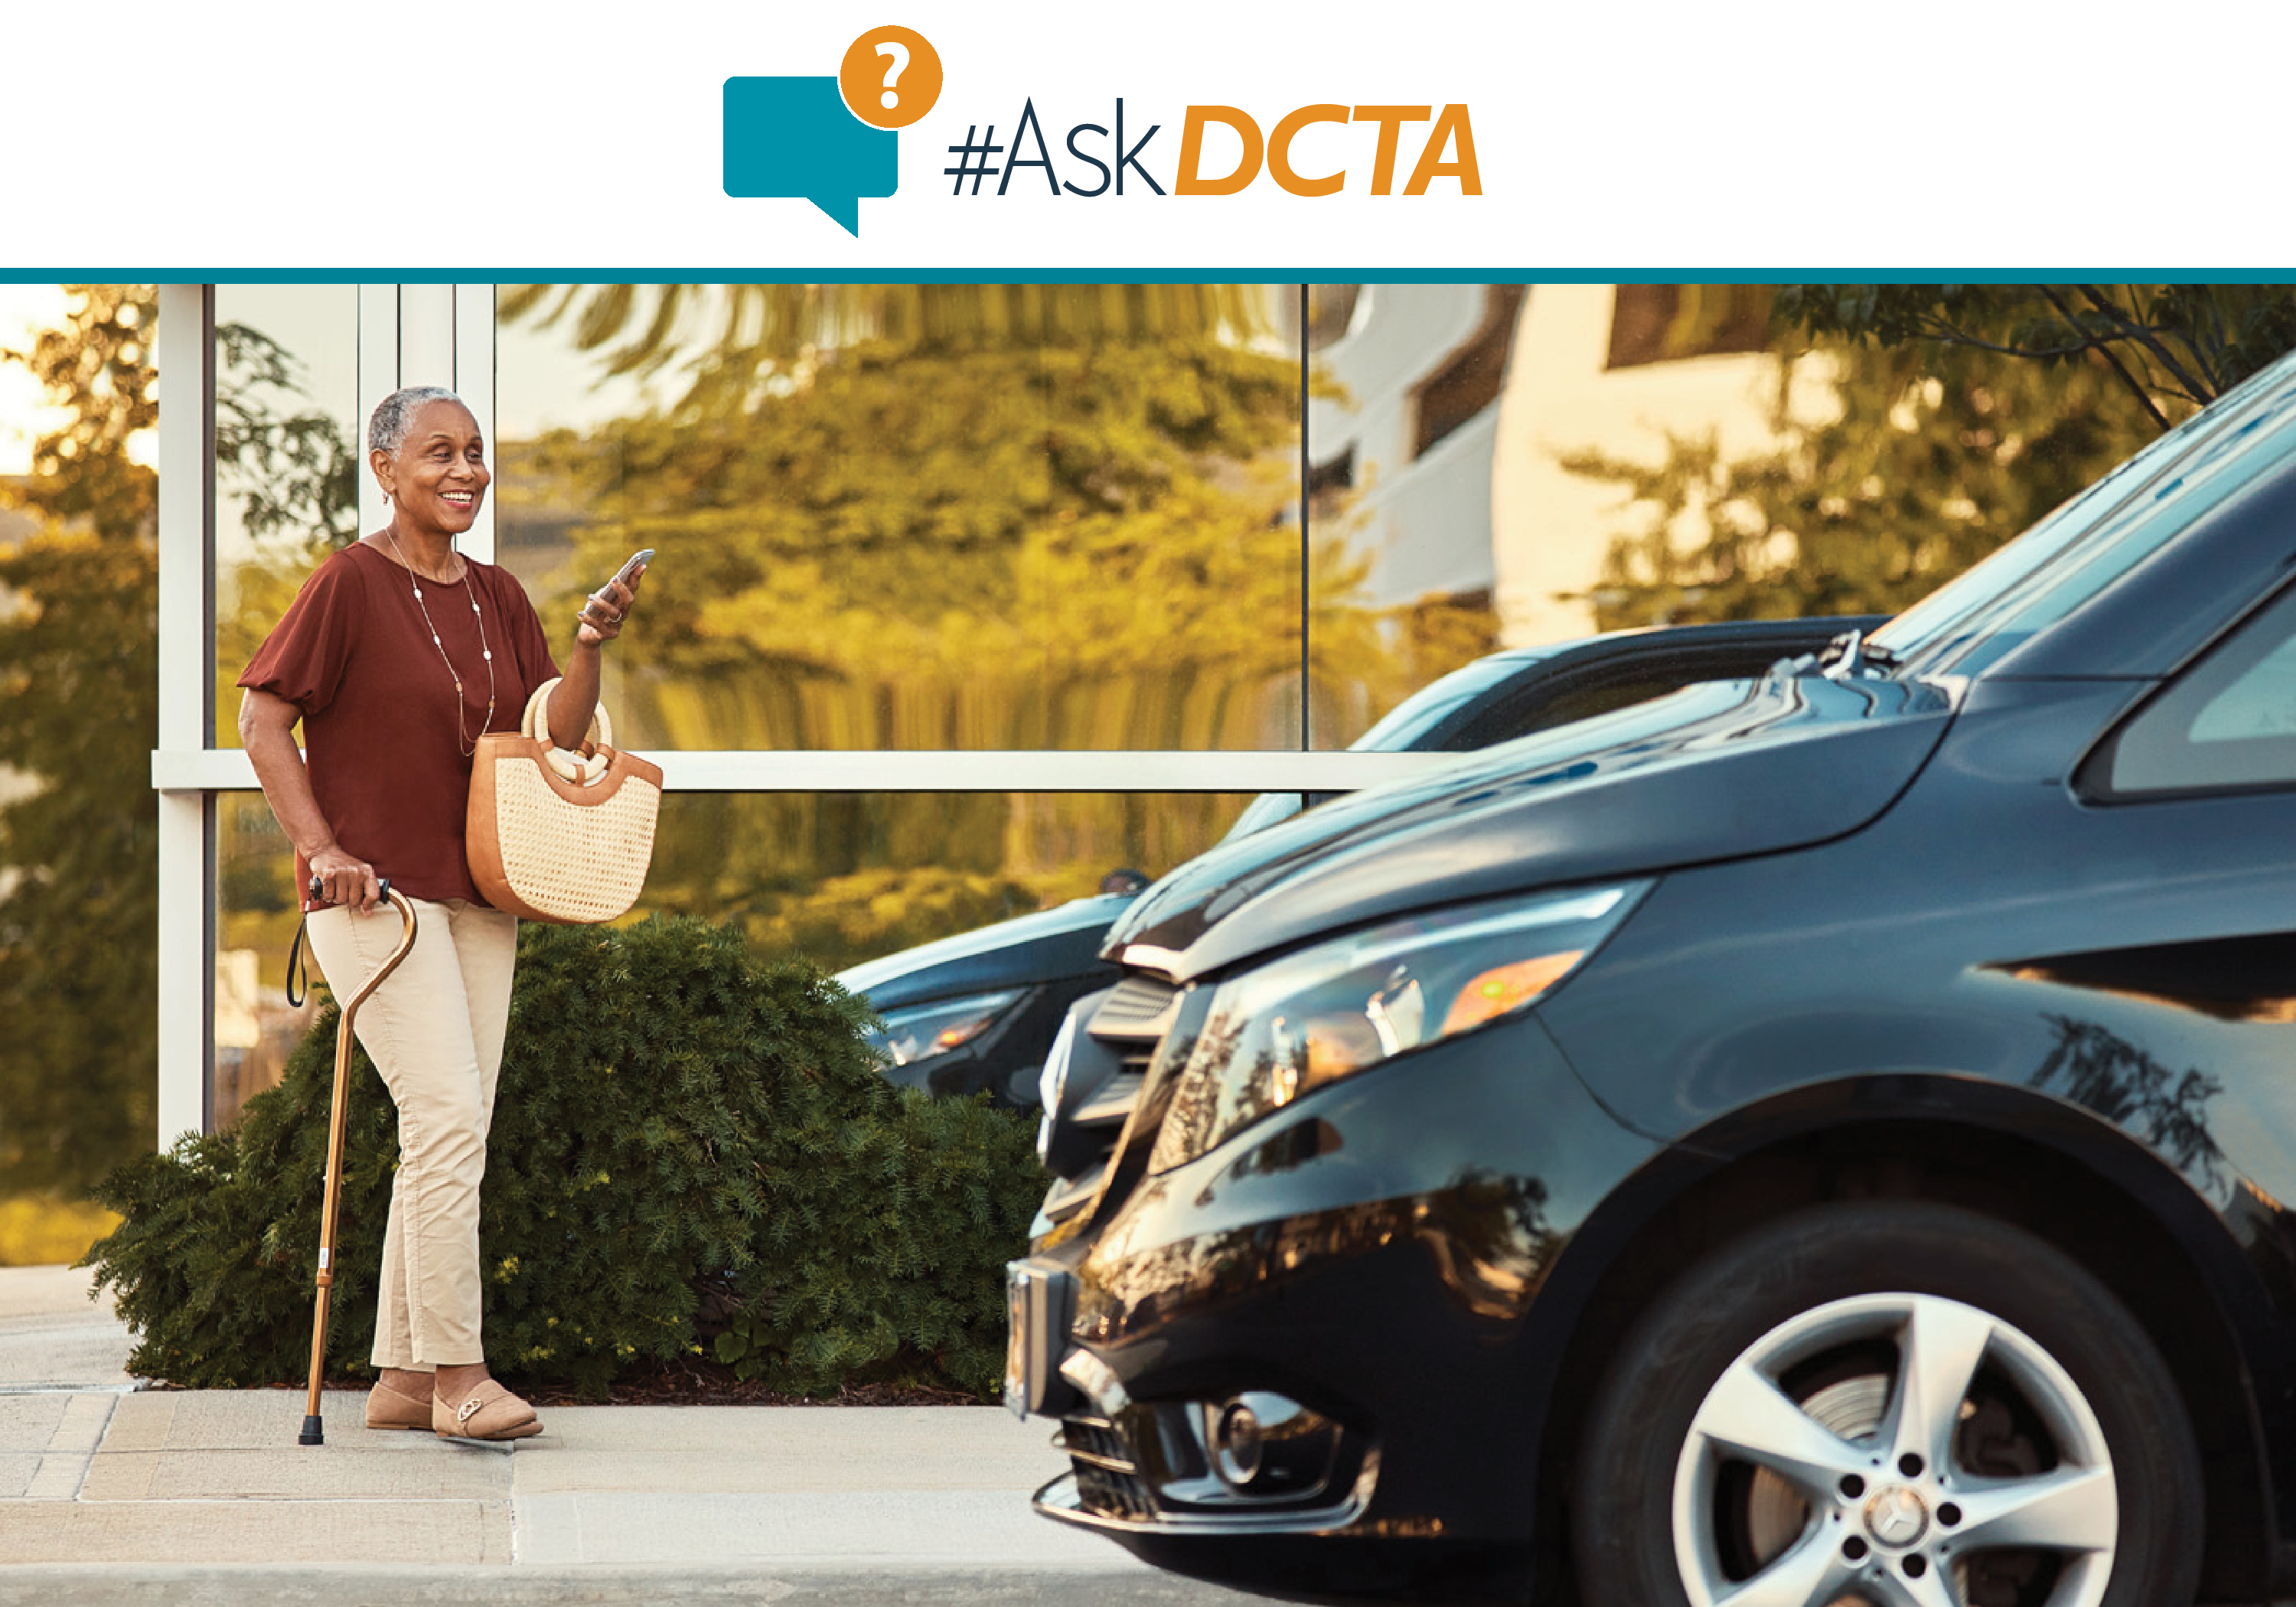 #AskDCTA: What is DCTA’s GoZone and how can I provide feedback on this proposed on-demand rideshare service?